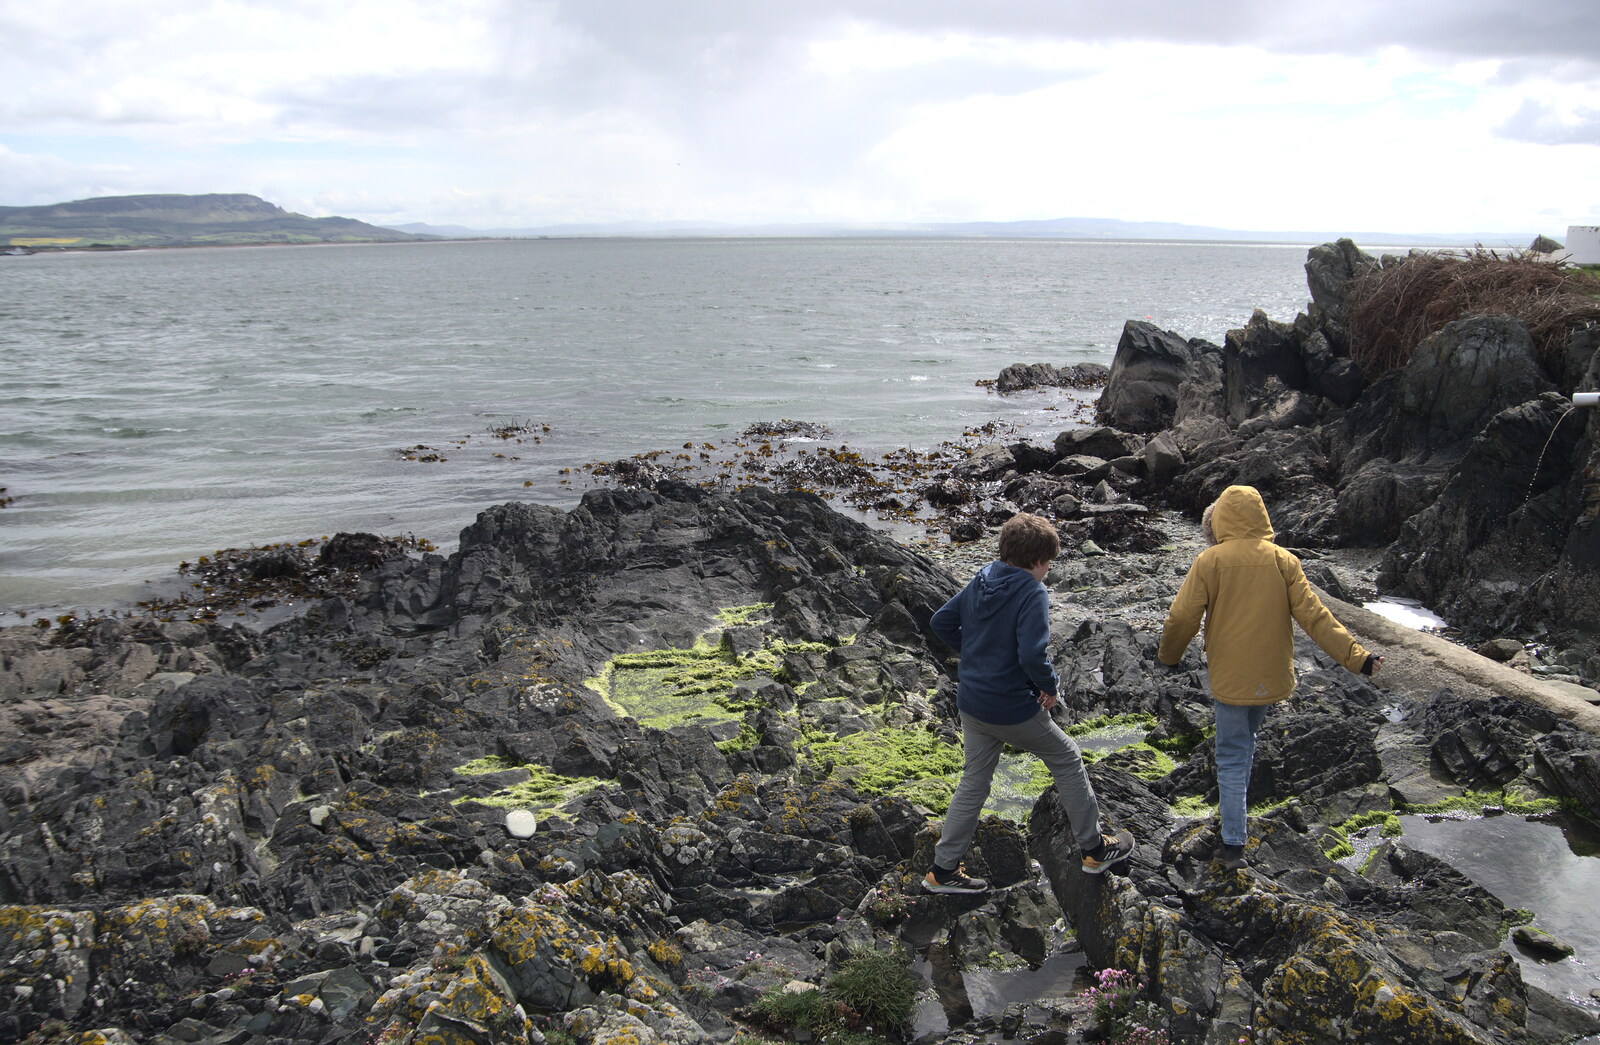 Greencastle, Doagh and Malin Head, County Donegal, Ireland - 19th April 2022: The boys explore the rocks